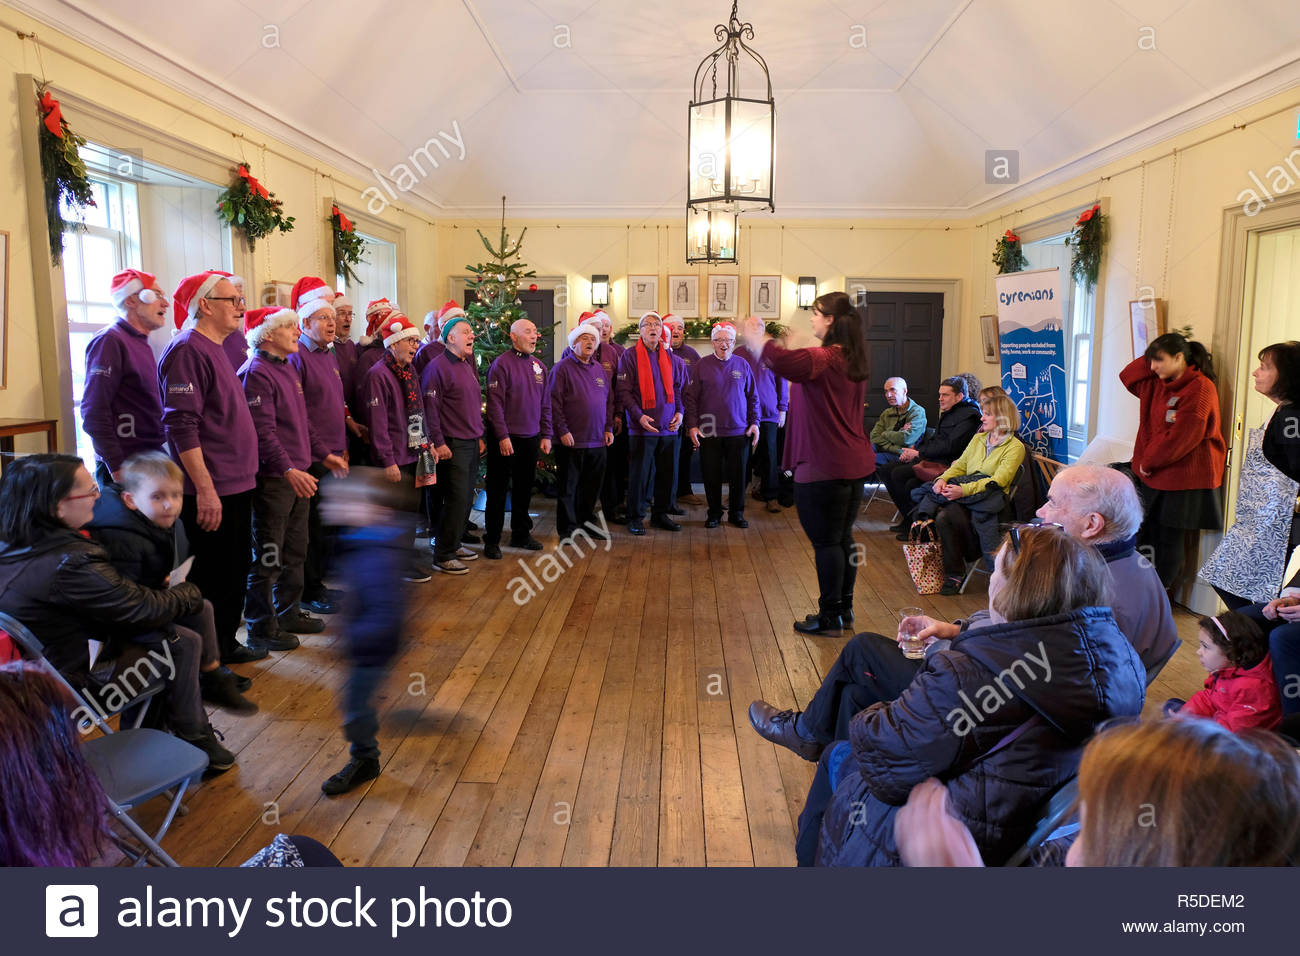 Edinburgh, Scotland, United Kingdom. 1st December,  2018.  The Rolling Hills Chorus performs for St. Andrew Fair Event at the Botanic Cottage, Royal Botanic Garden, raising money for the Cyrenians charity helping the homeless.  Credit: Craig Brown/Alamy Live News. Stock Photo